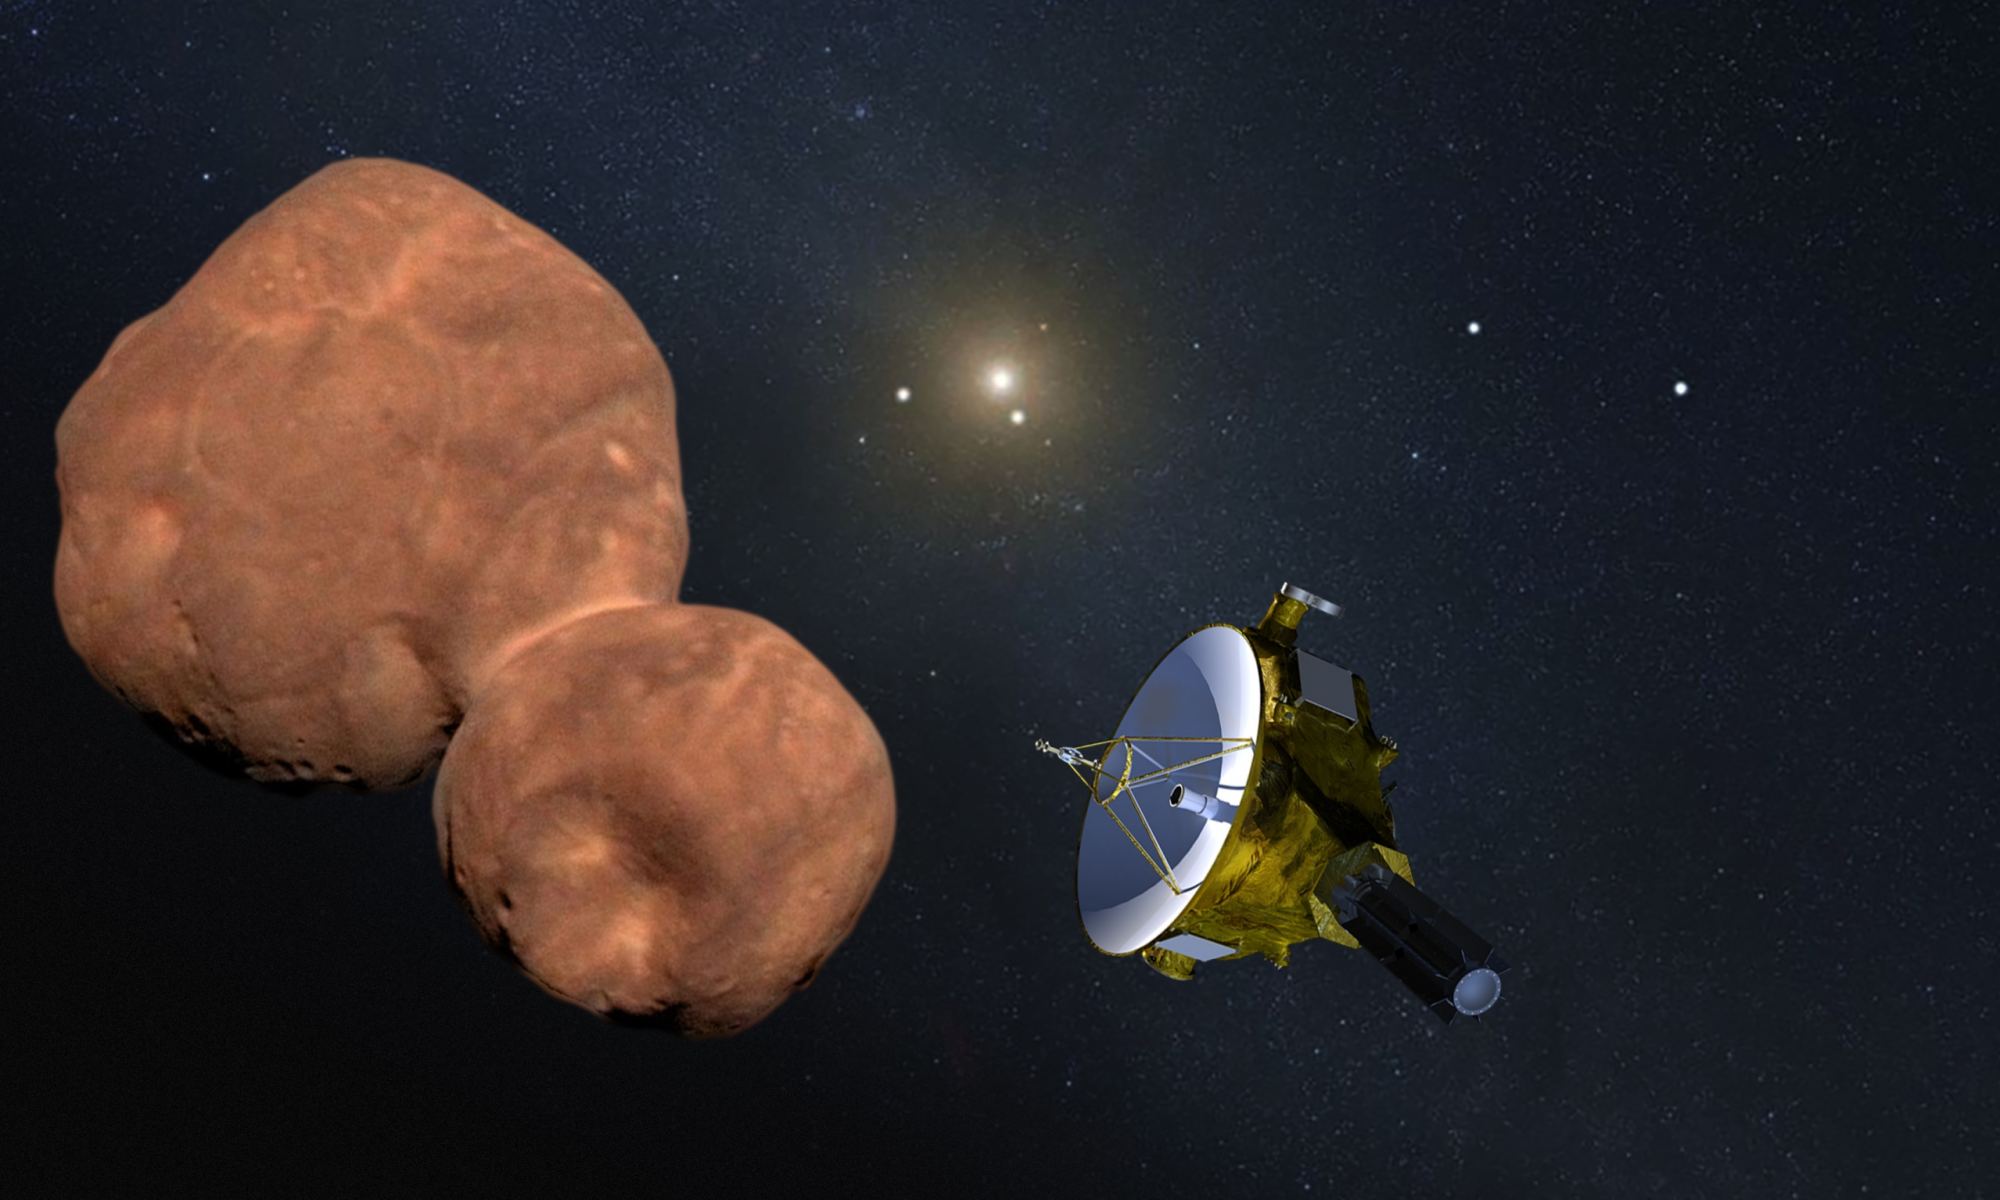 Since its last flyby, of the Kuiper Belt object Arrokoth, the New Horizons mission has been exploring objects in the Kuiper Belt as well as performing heliospheric and astrophysical observations. Courtesy: Credit: NASA/Johns Hopkins University Applied Physics Laboratory/Southwest Research Institute//Roman Tkachenko